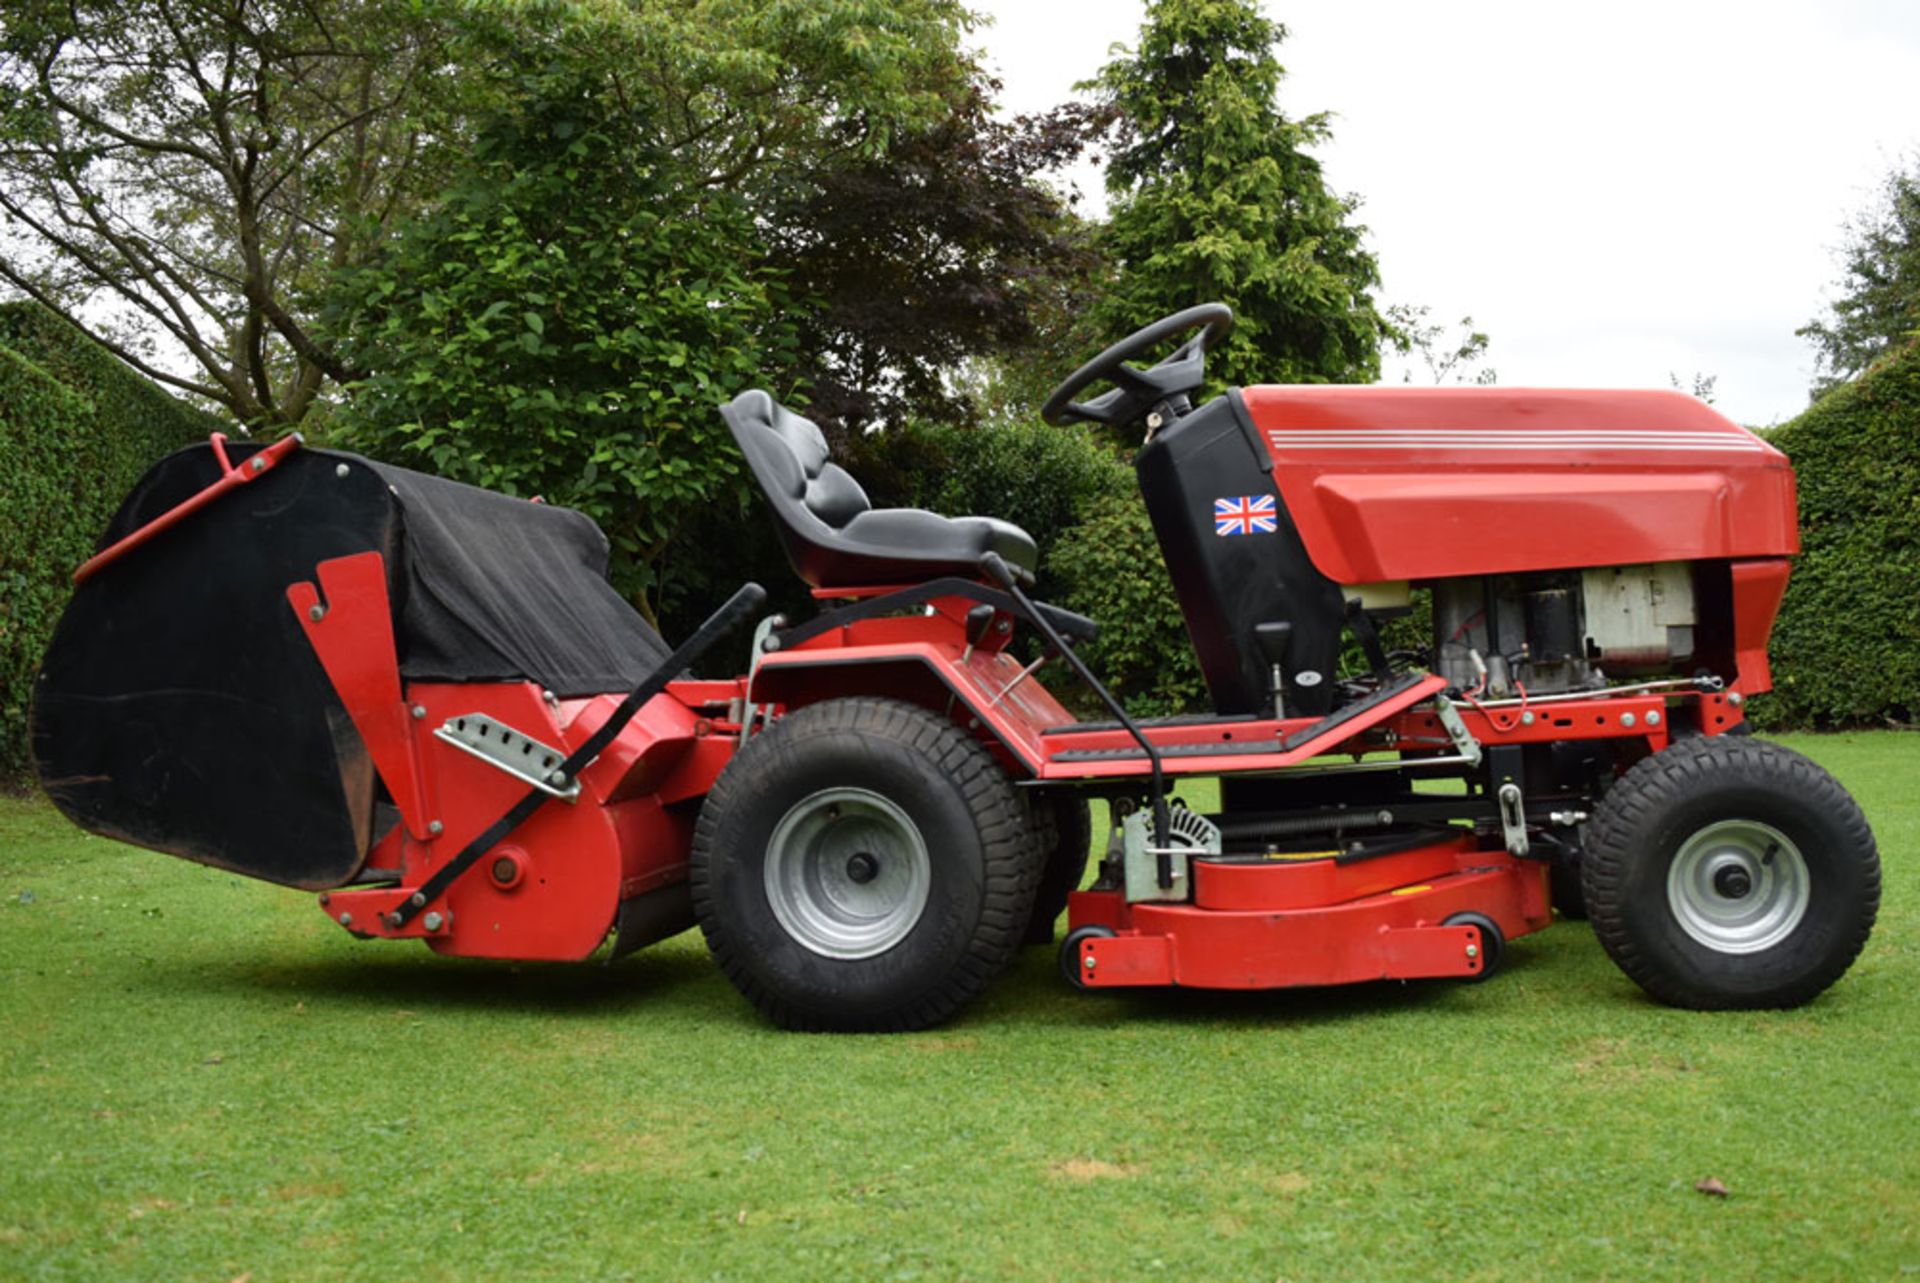 1999 Westwood S1300M 36"" Rear Discharge Garden Tractor With PGC - Image 2 of 8